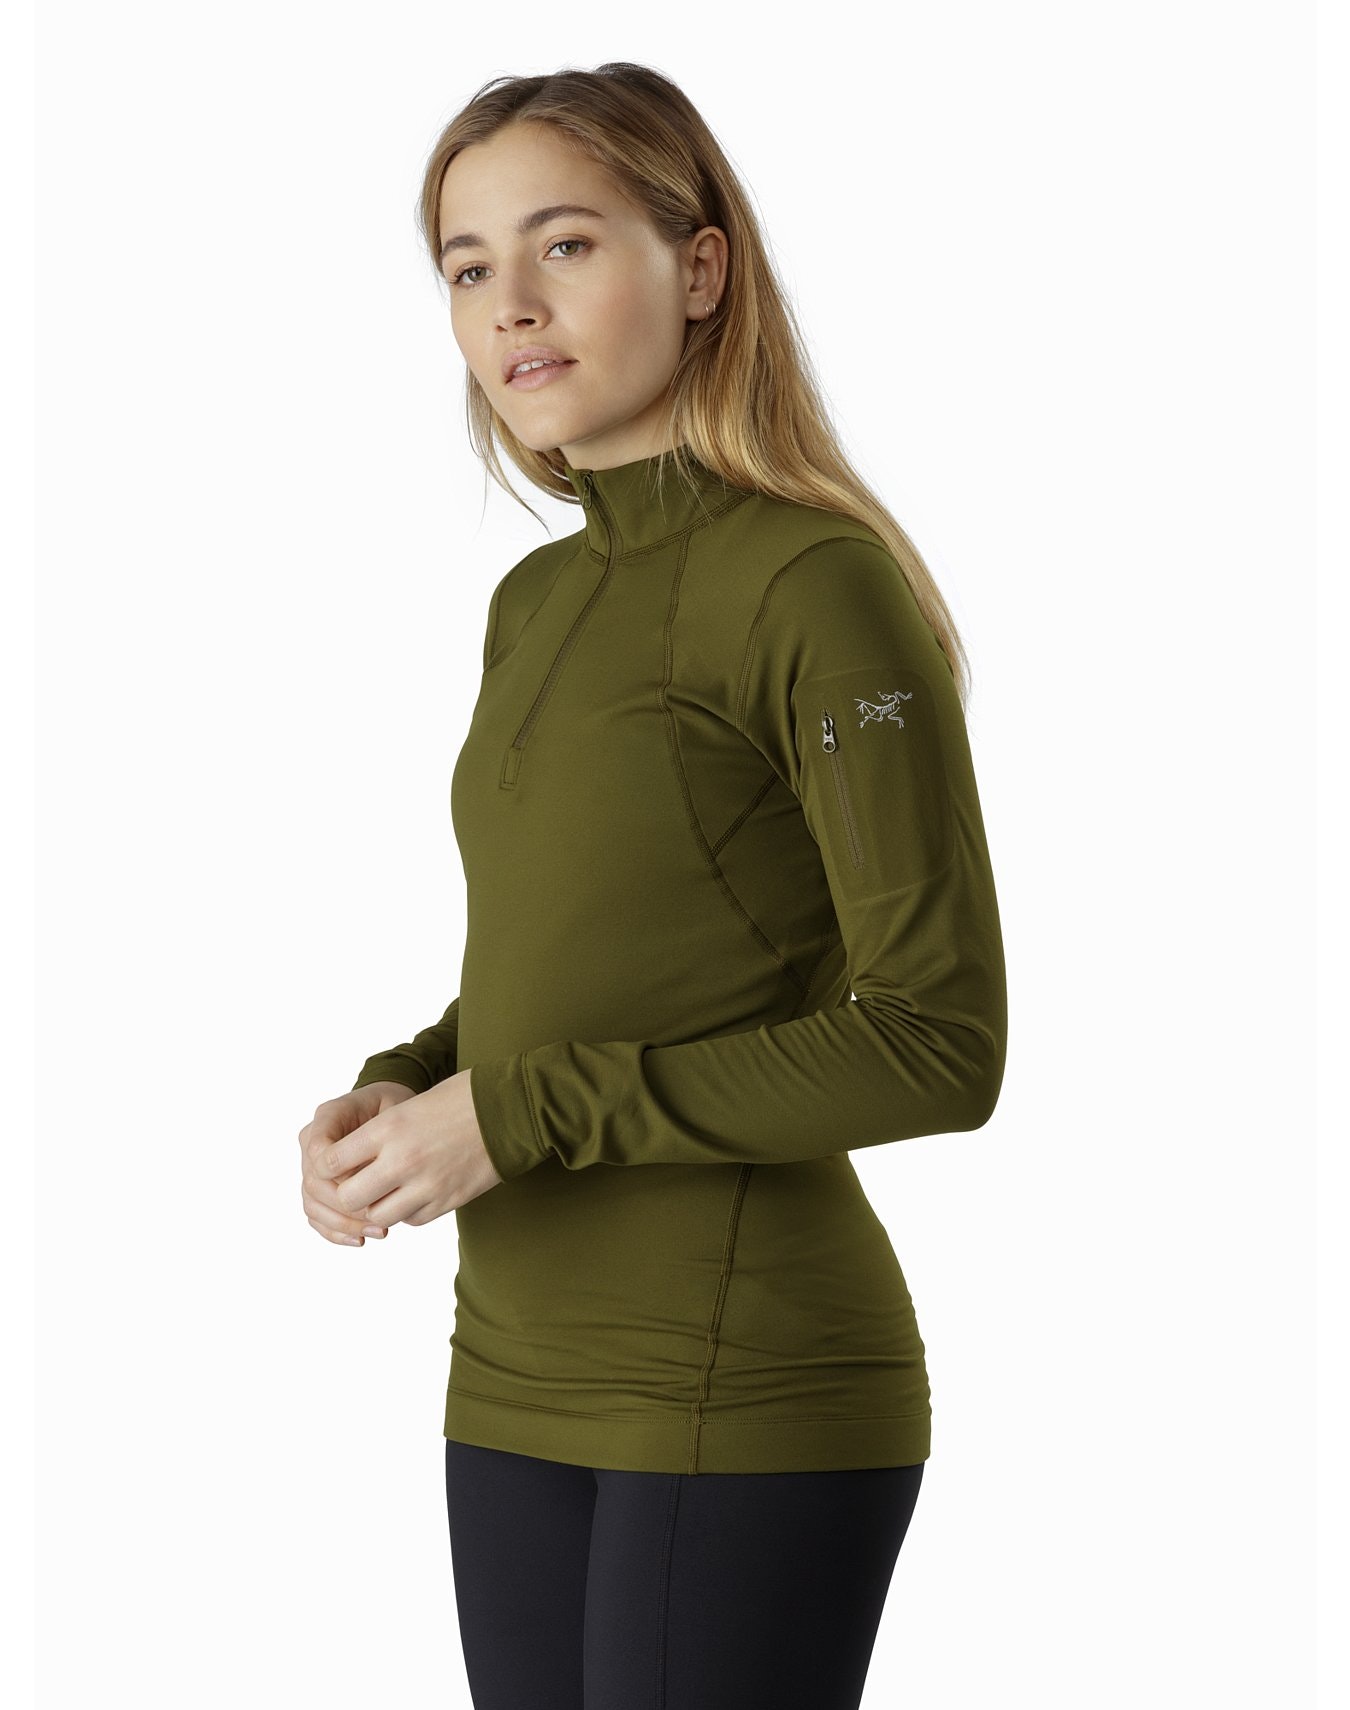 Rho LT Zip Neck for Women. Gear Review: Arc’teryx’s base layers for the season. 